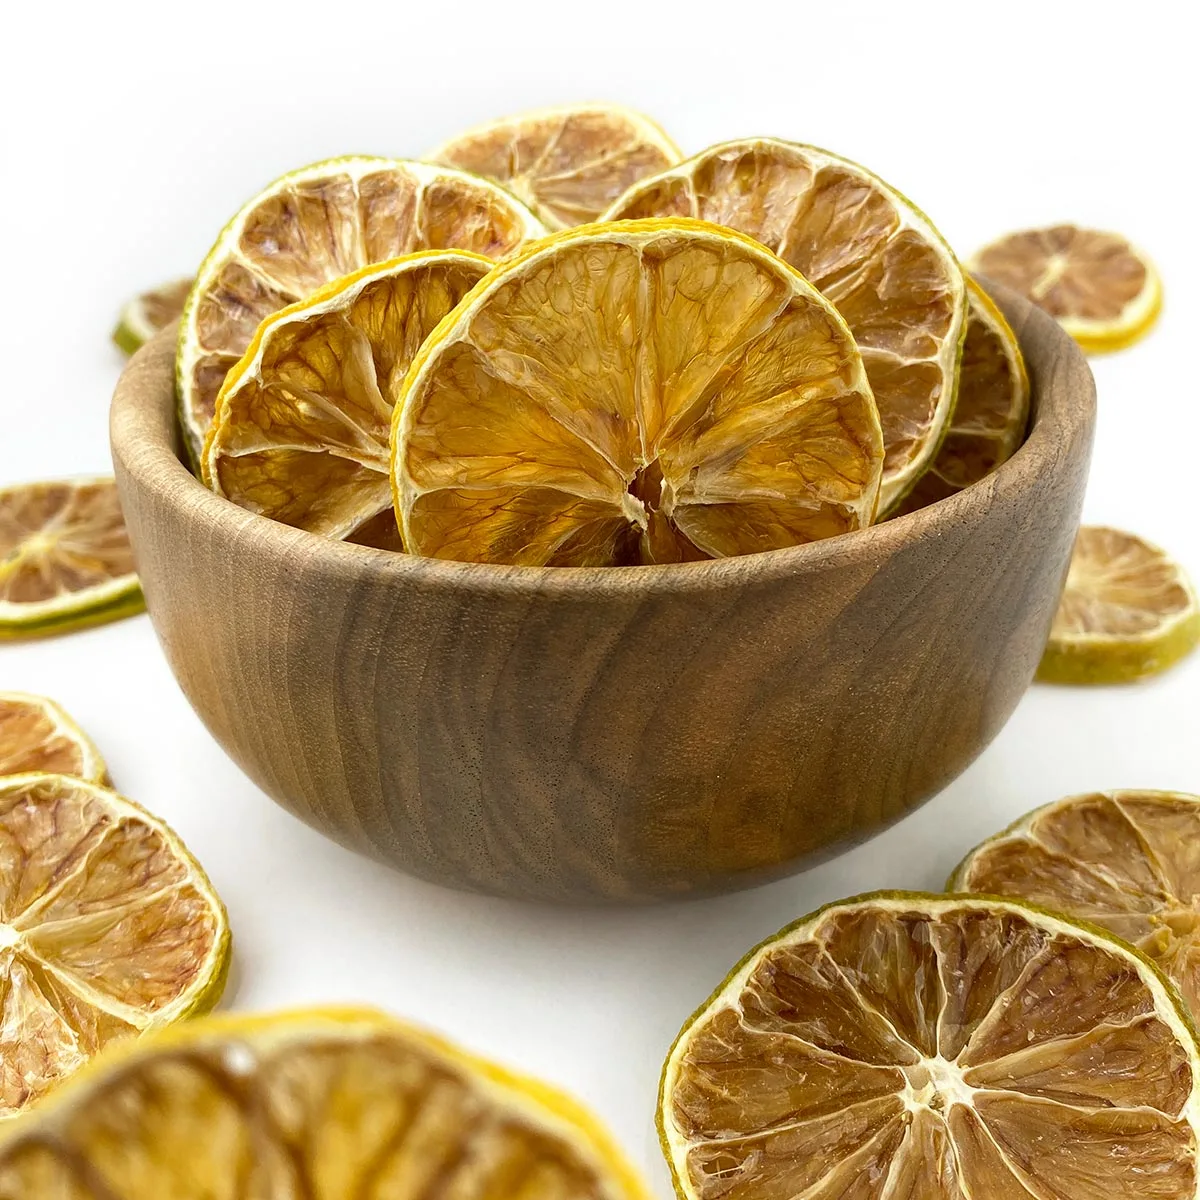 Dried Lemon 101: Nutrition, Benefits, How To Use, Buy, Store